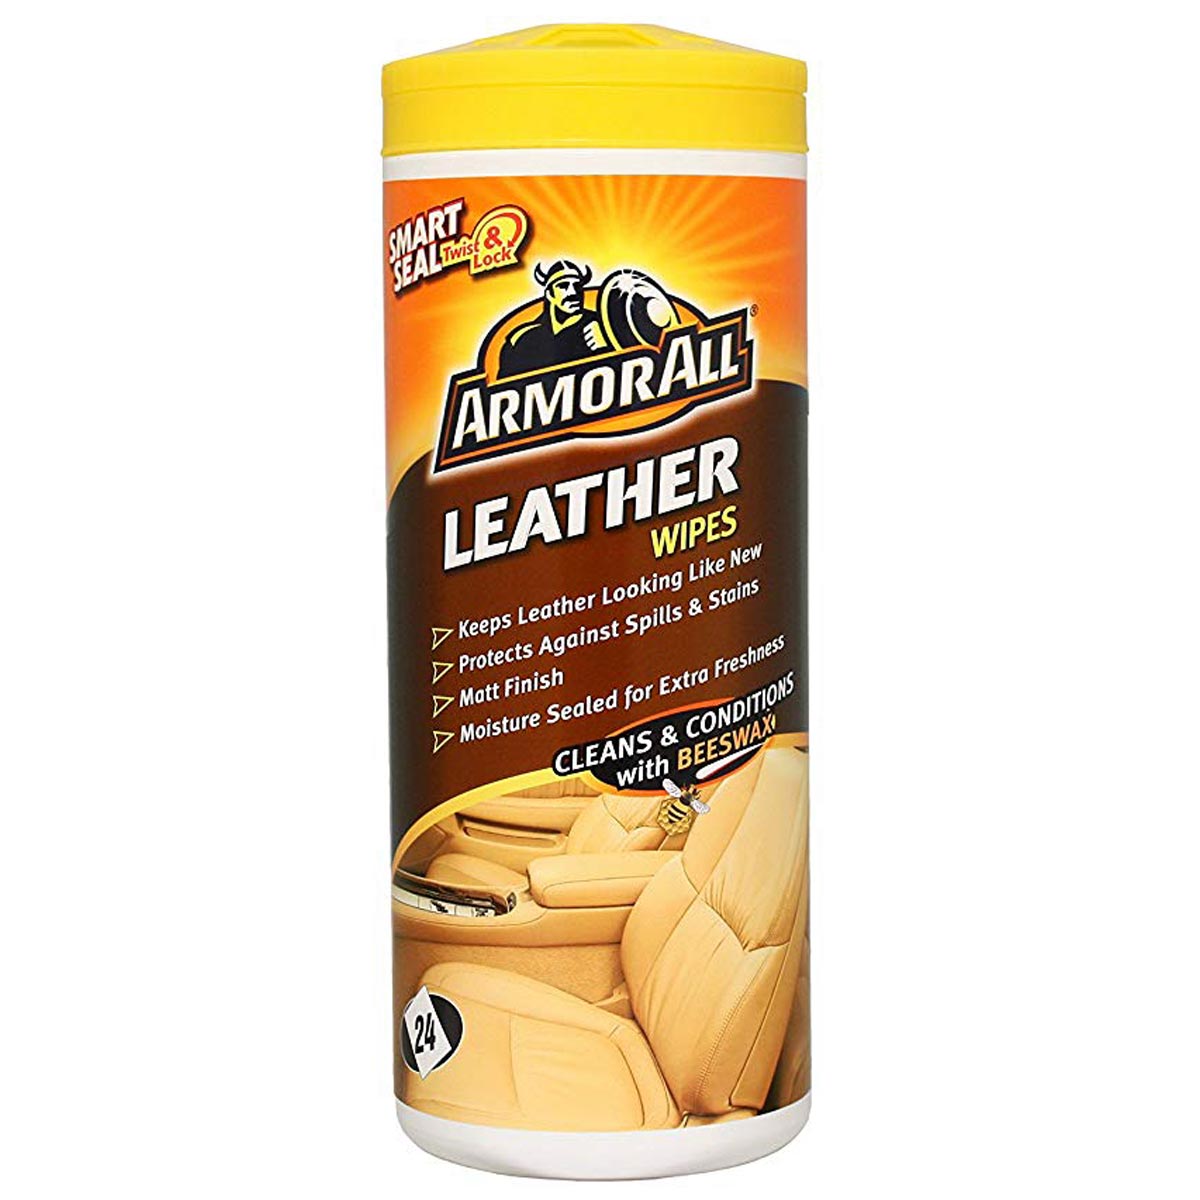 Armor All Leather Wipes - 24 Wipes Pack